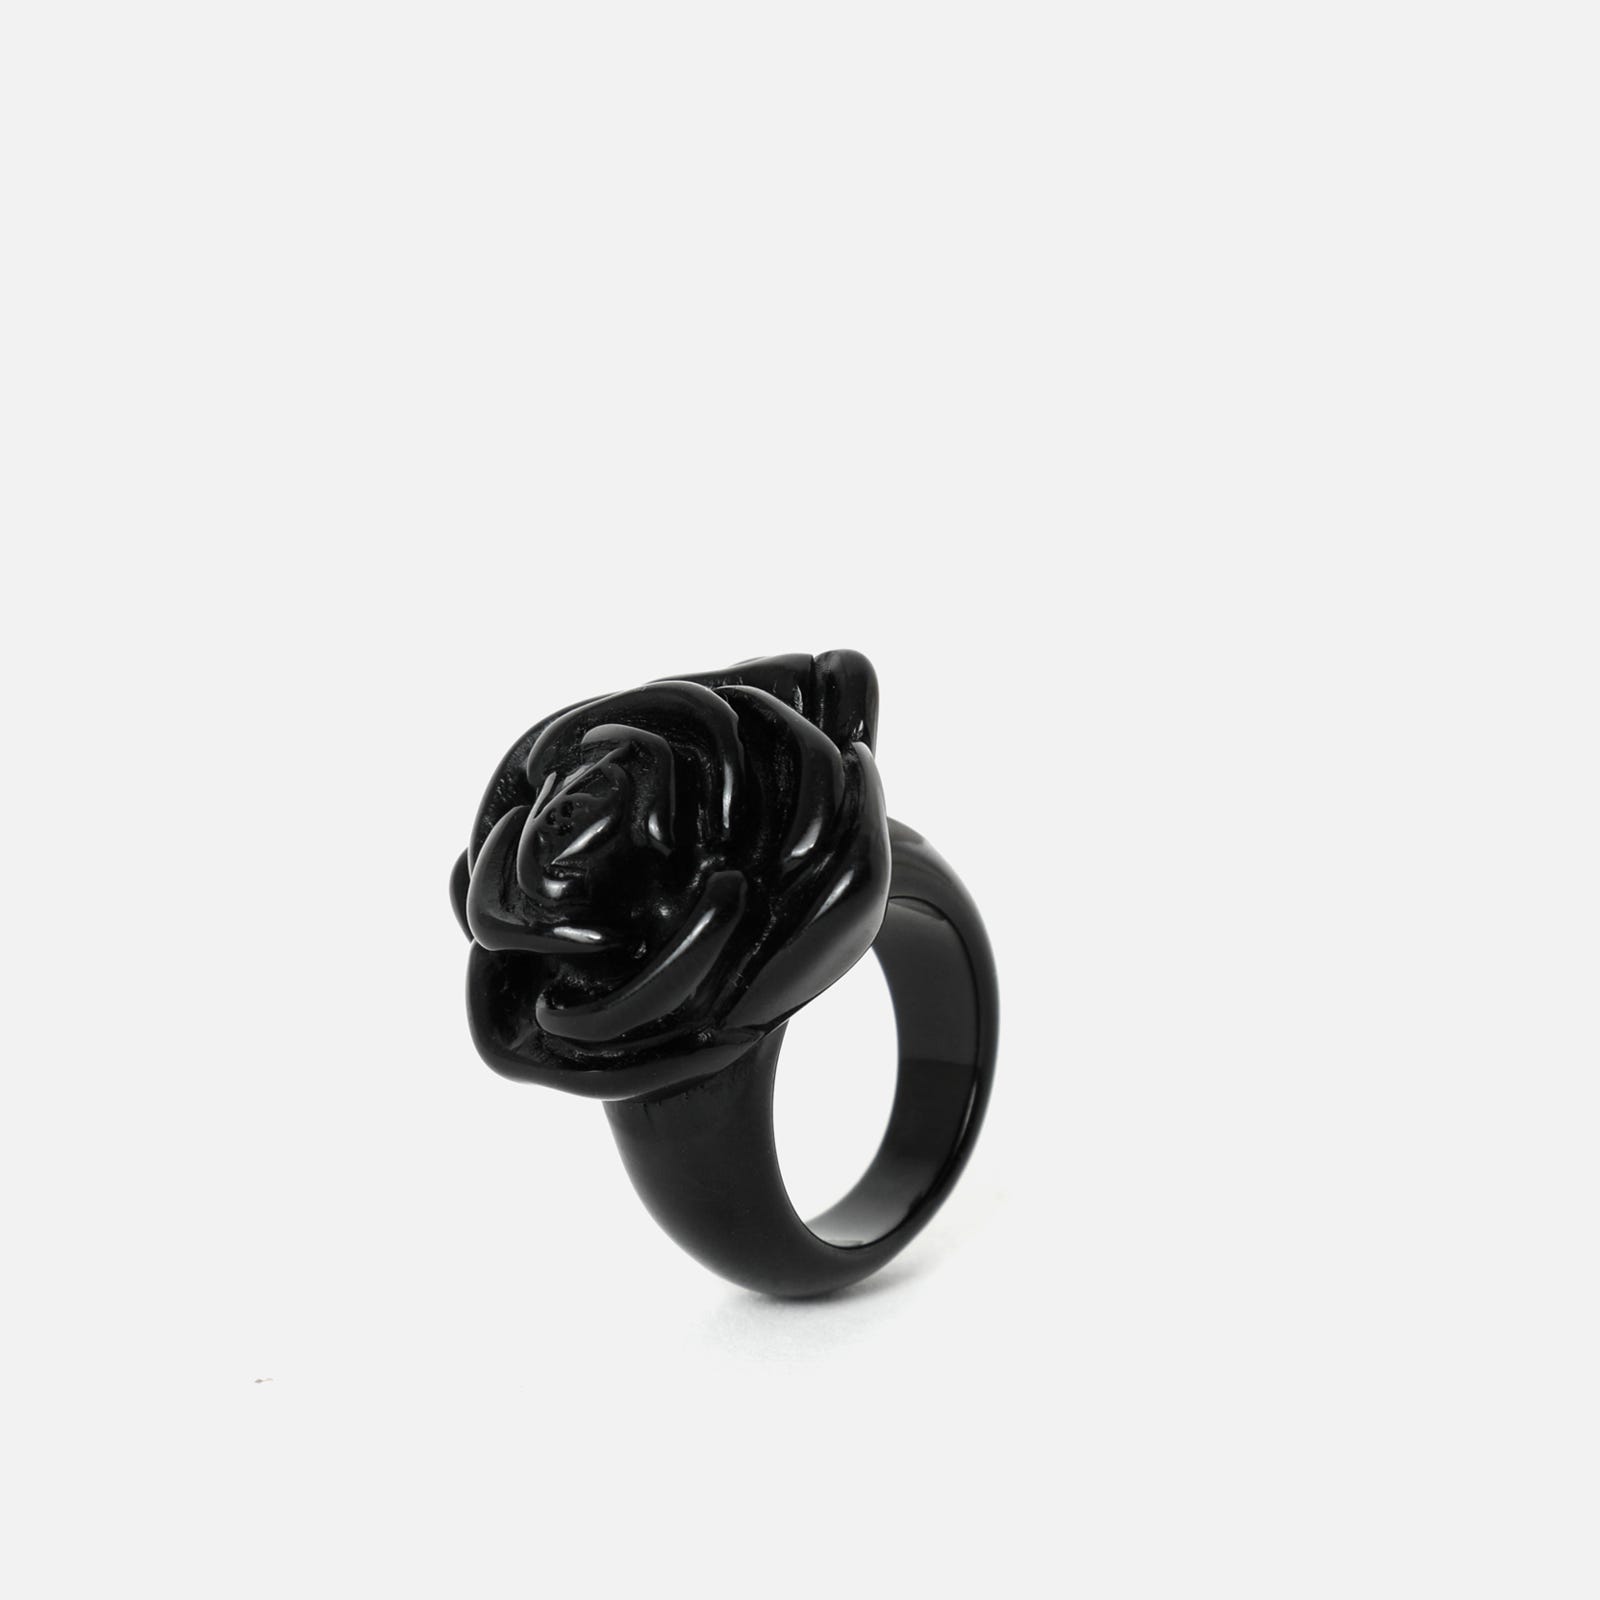 Black ring with flower shape